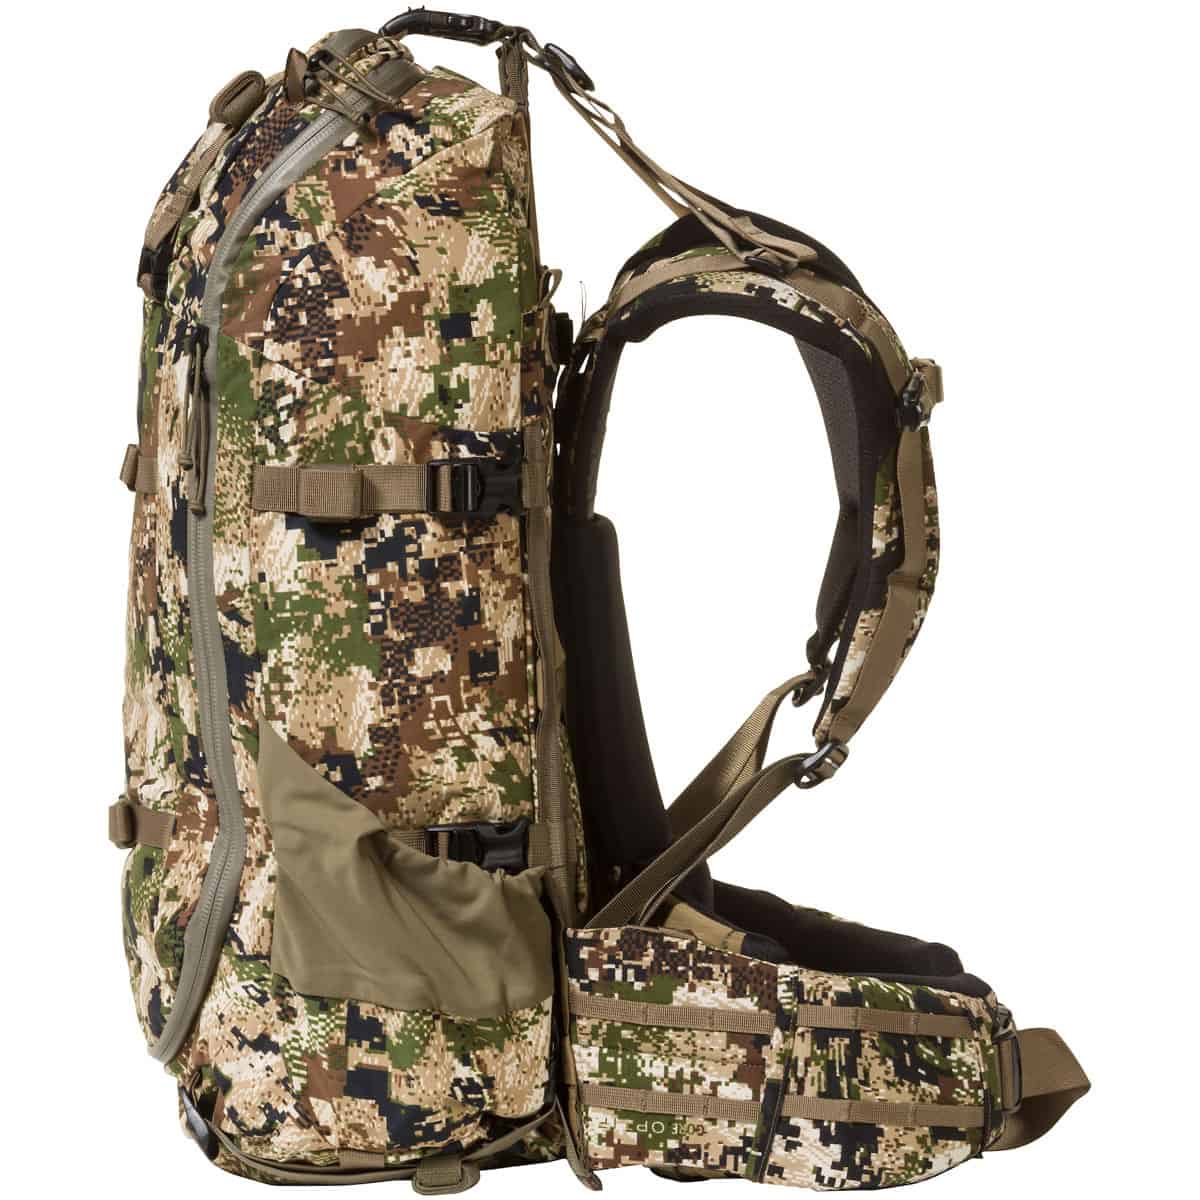 888564186343 110889 Mystery Ranch Sawtooth 45 Small Hunting Backpack optifade subalpine Side